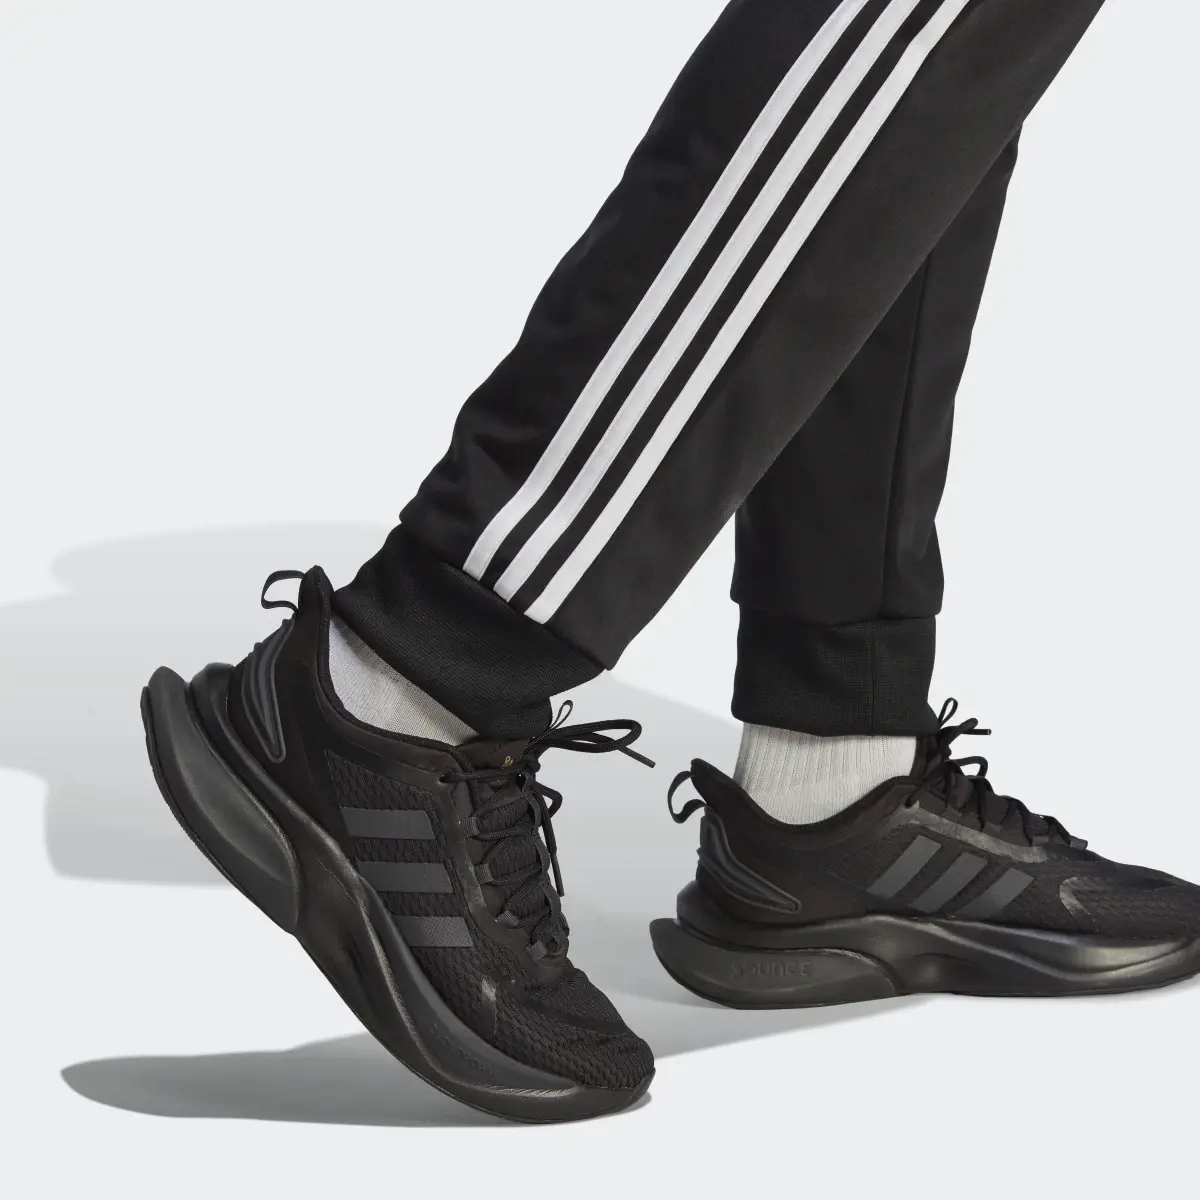 Adidas Basic 3-Stripes Tricot Track Suit. 3